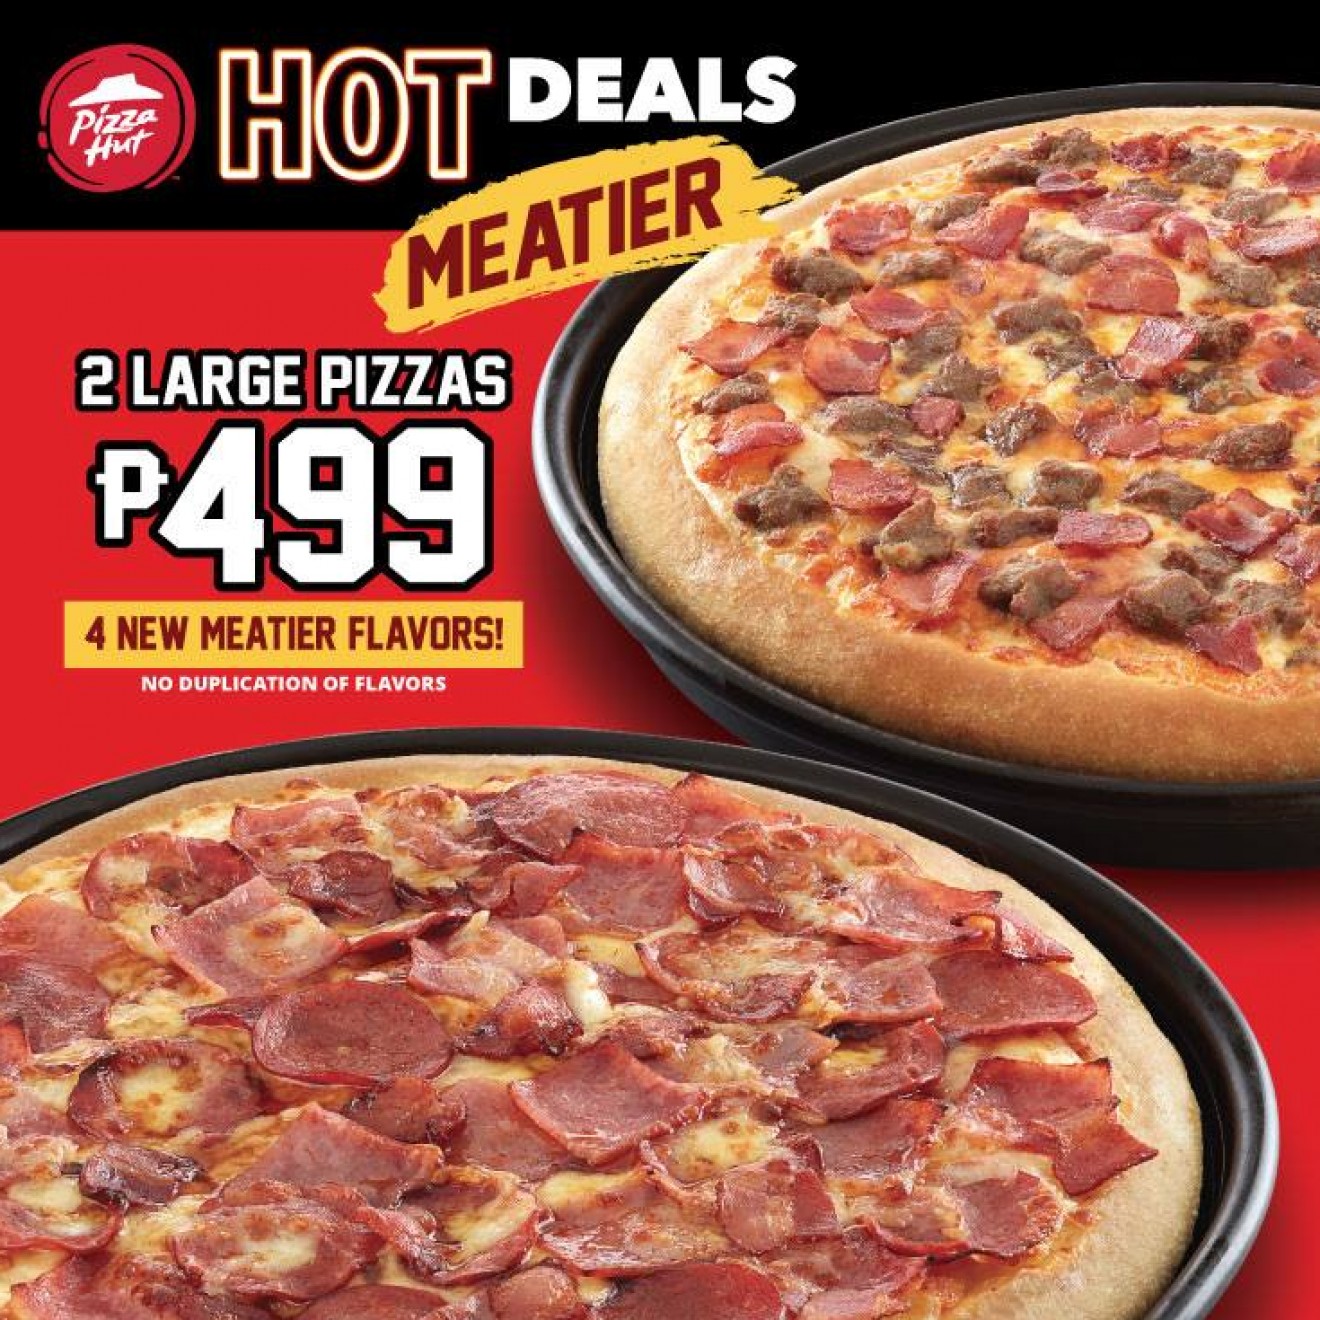 Pizza Hut’s Meatier Hot Deals 2 Large Pizzas for Only Php499 PROUD